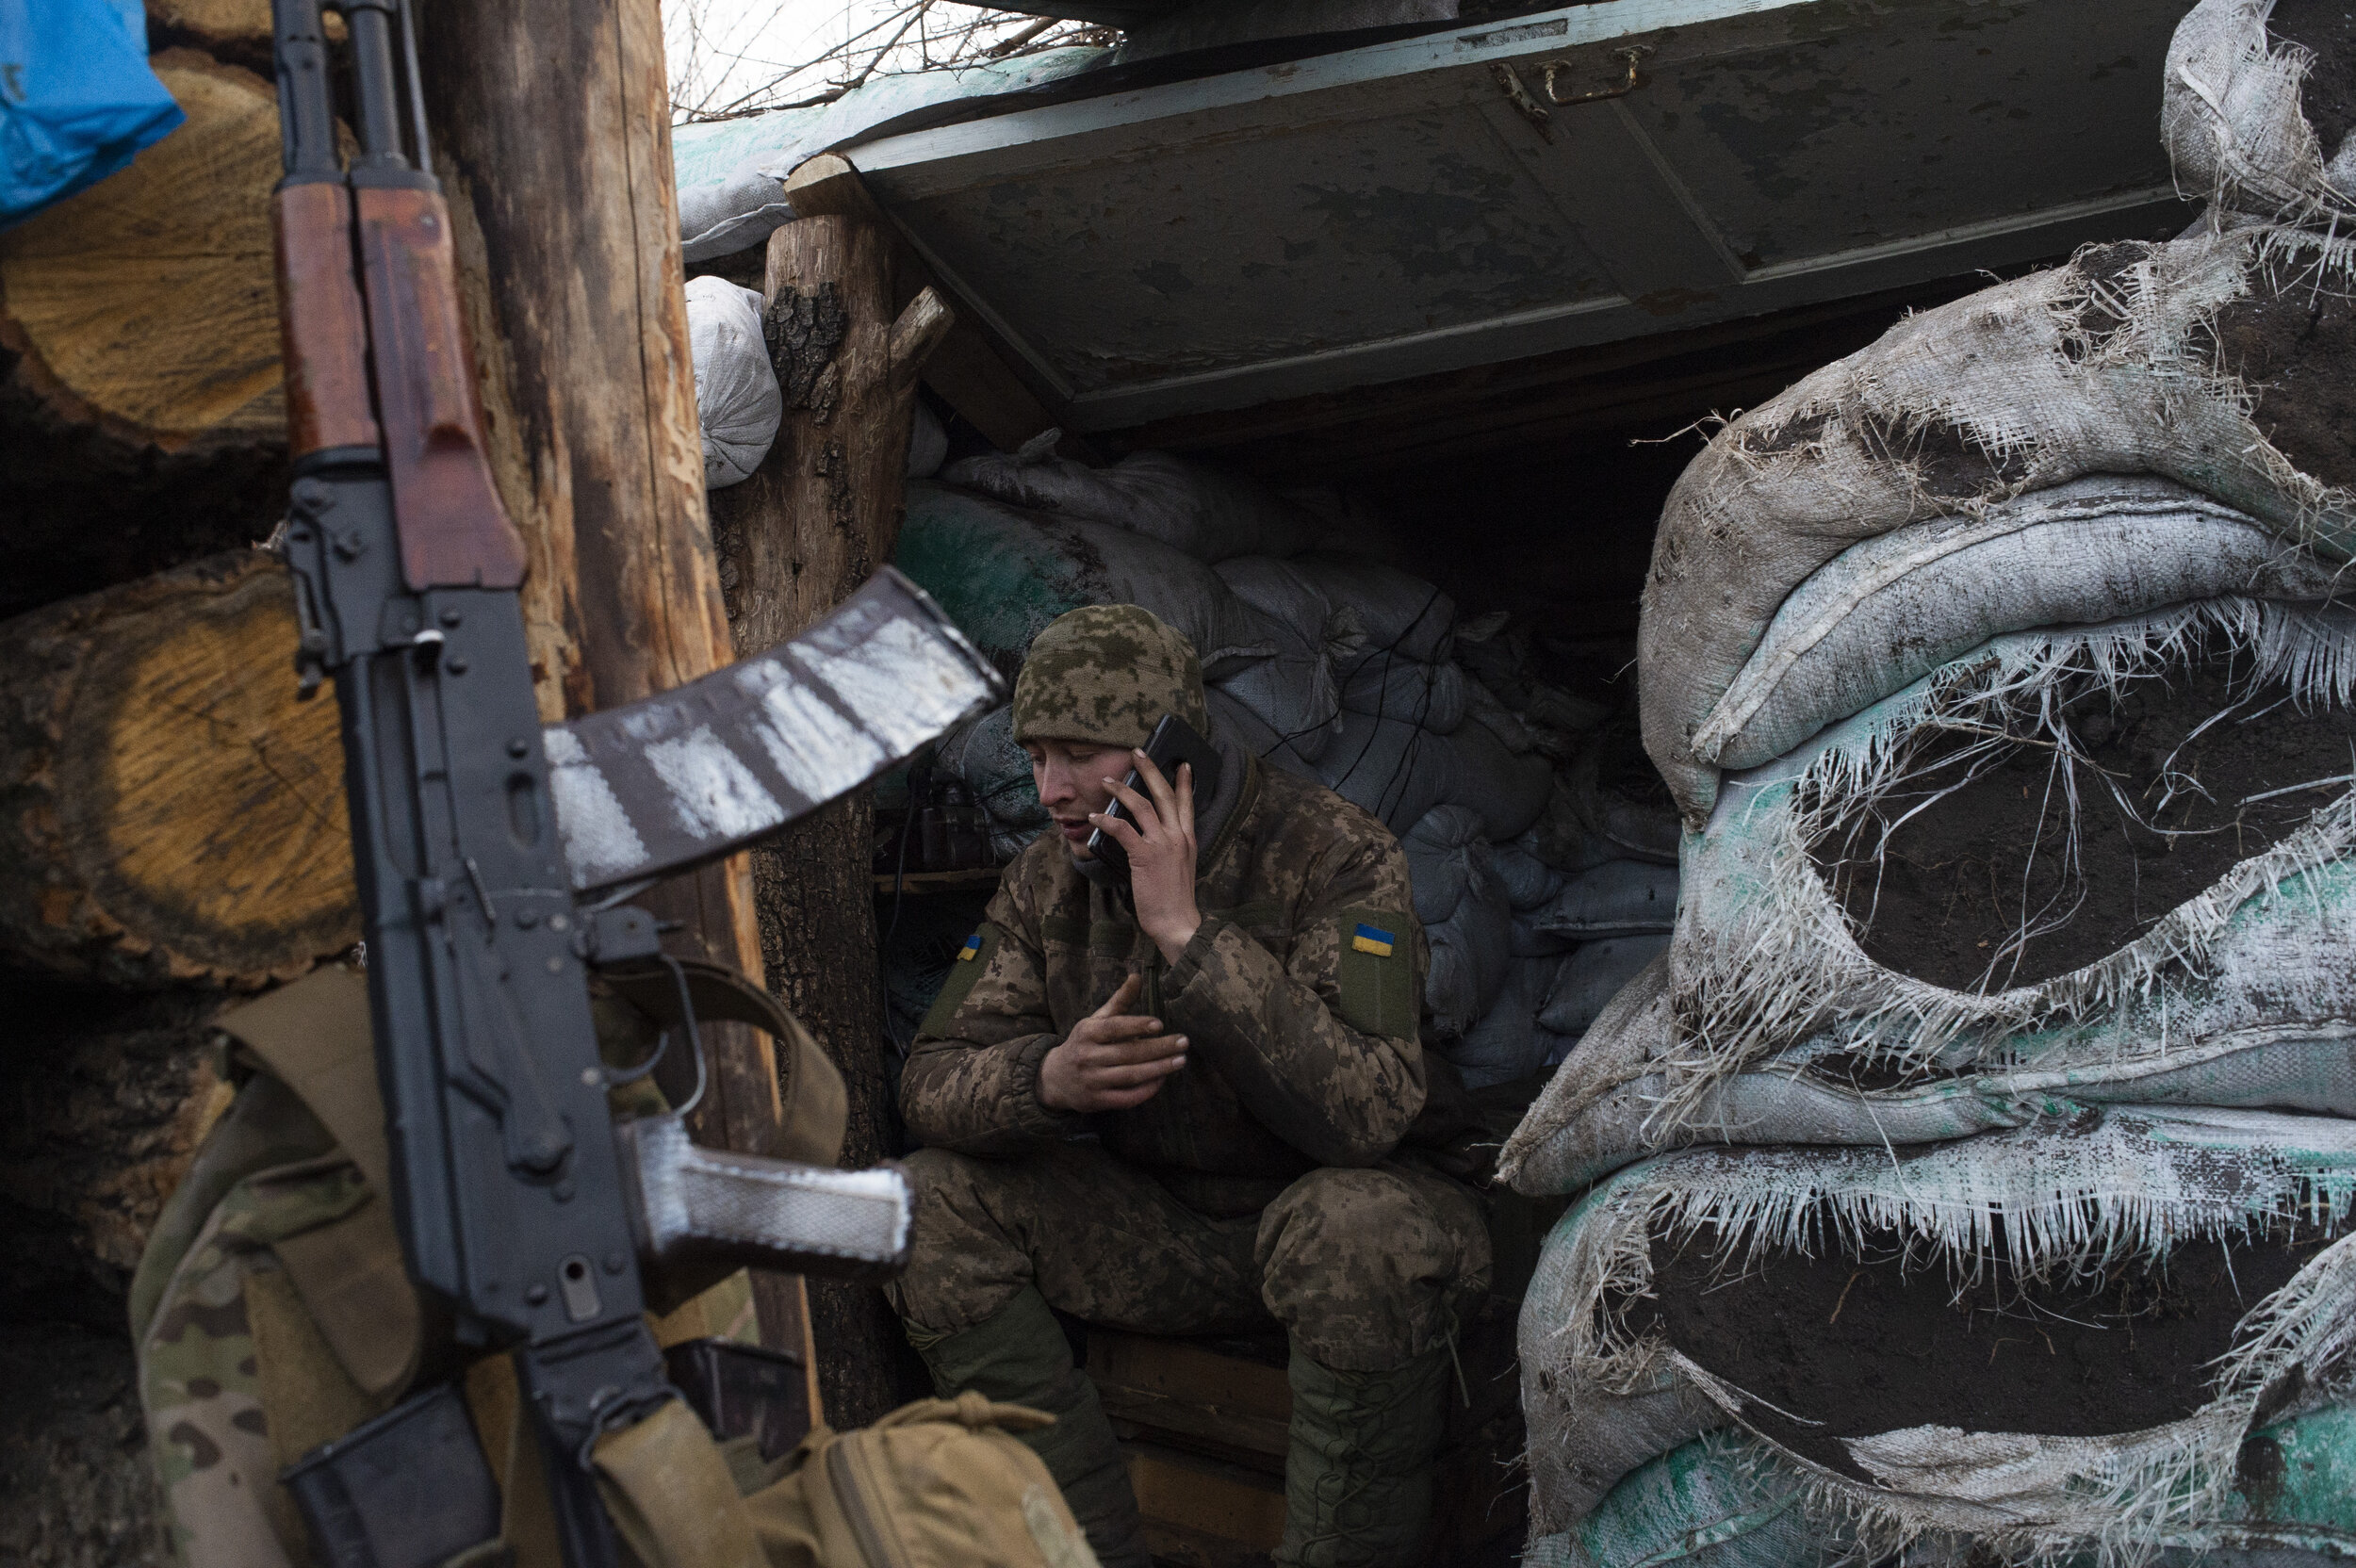  A soldier of the 54th Mechanized Rifle Brigade speaks to his wife on his phone while manning the front position of ‘Point Zero’ in Zolote-4 on February 28, 2019. Periodic bouts of quiet often breed boredom and anxiety in the soldiers, who find thems